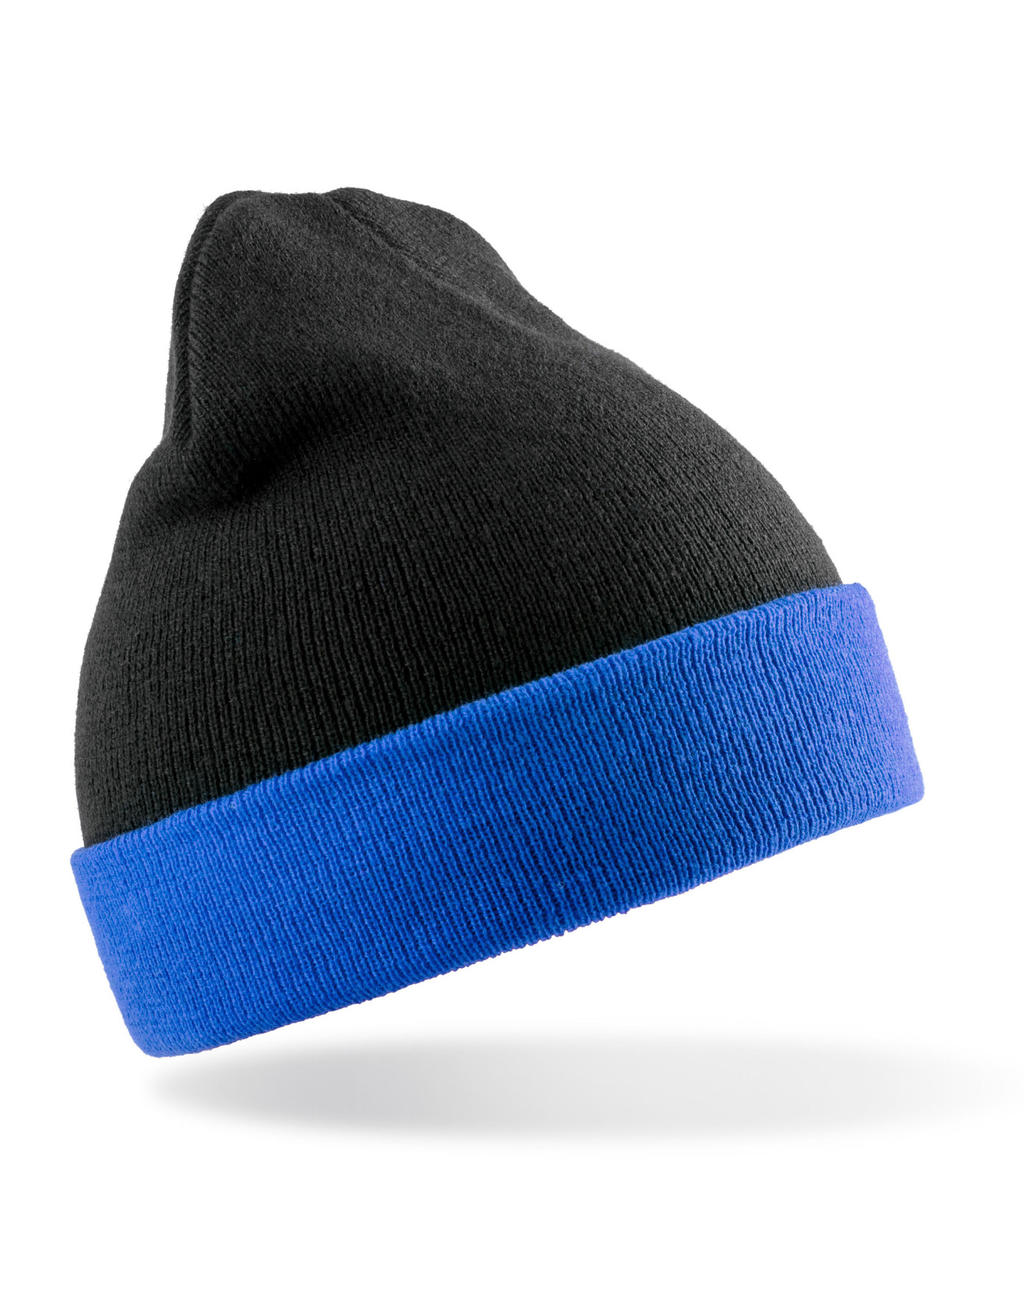  Recycled Black Compass Beanie in Farbe Black/Royal